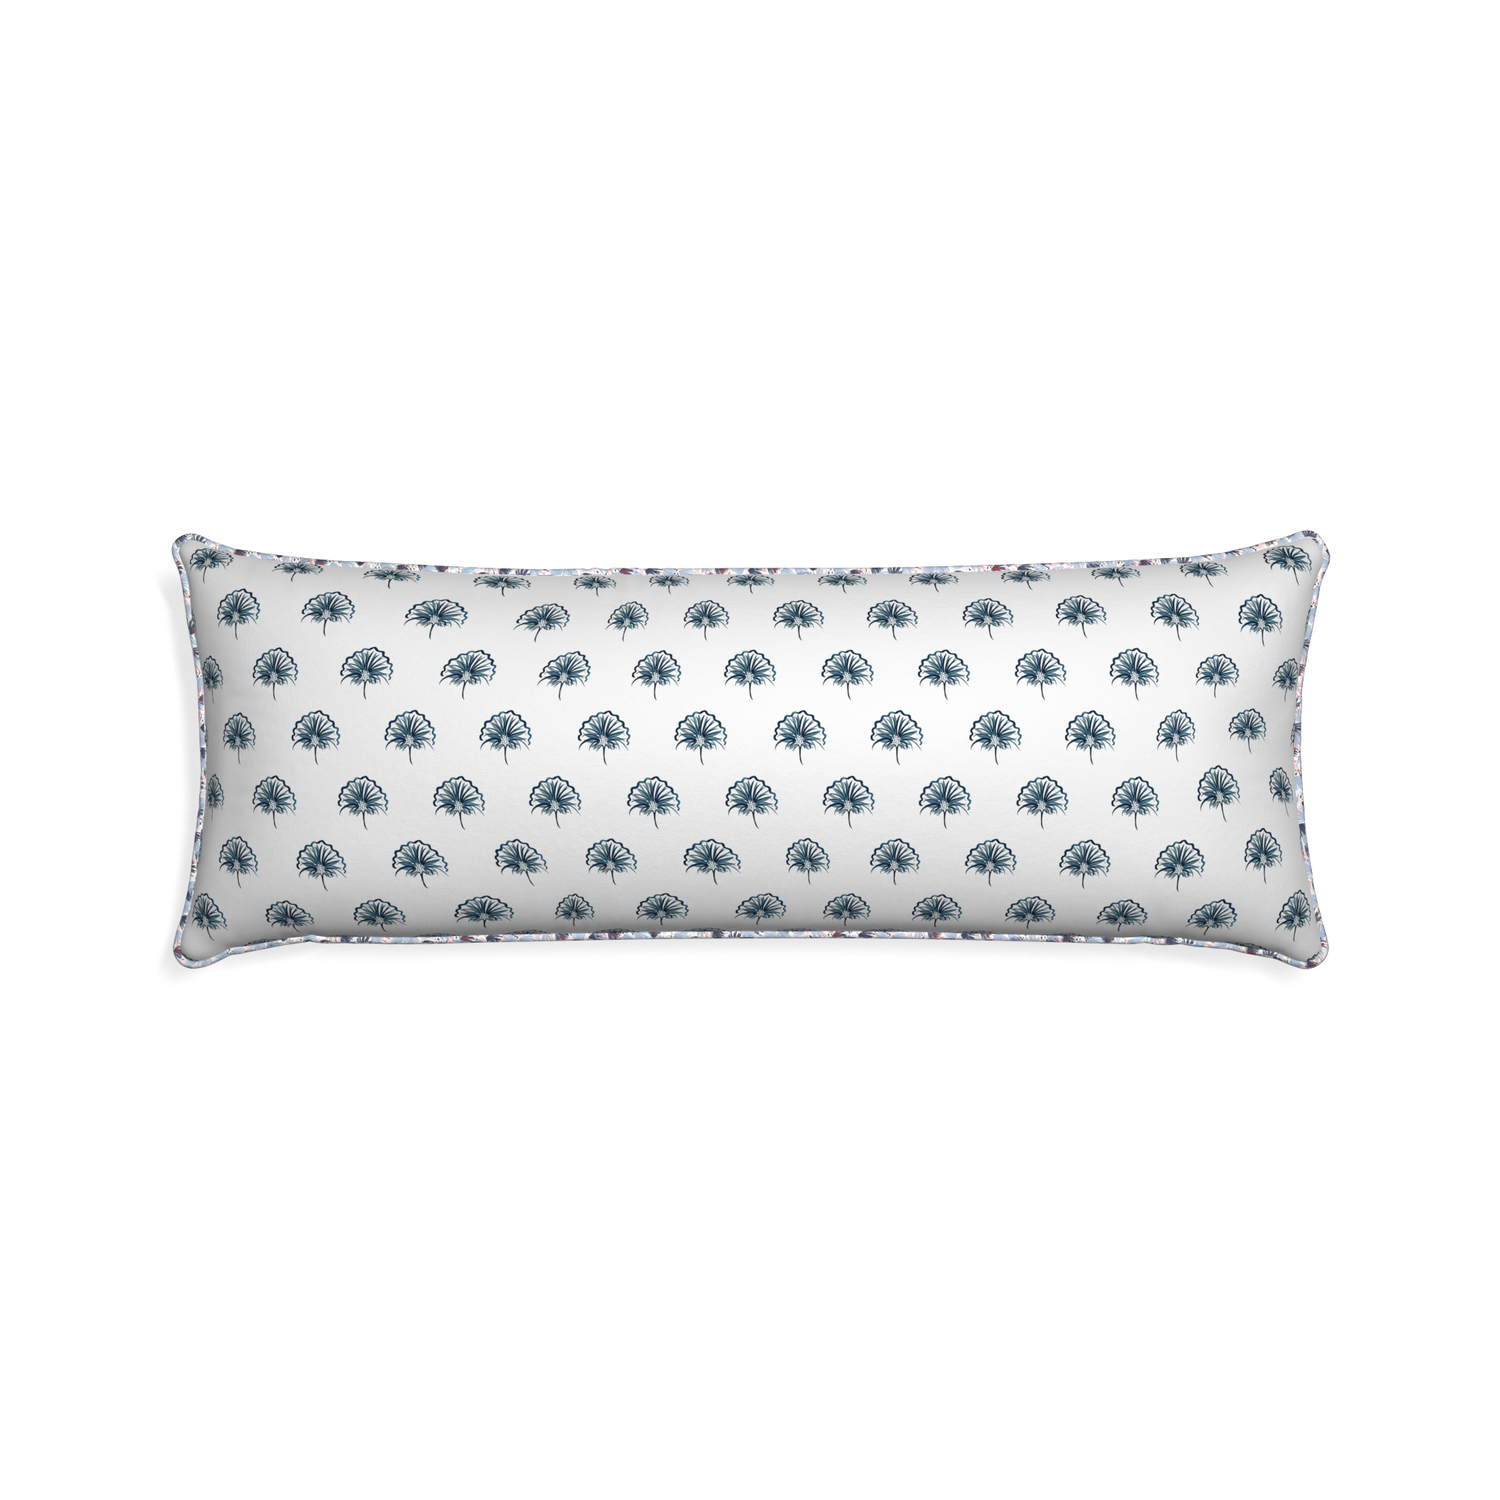 Xl-lumbar penelope midnight custom pillow with e piping on white background